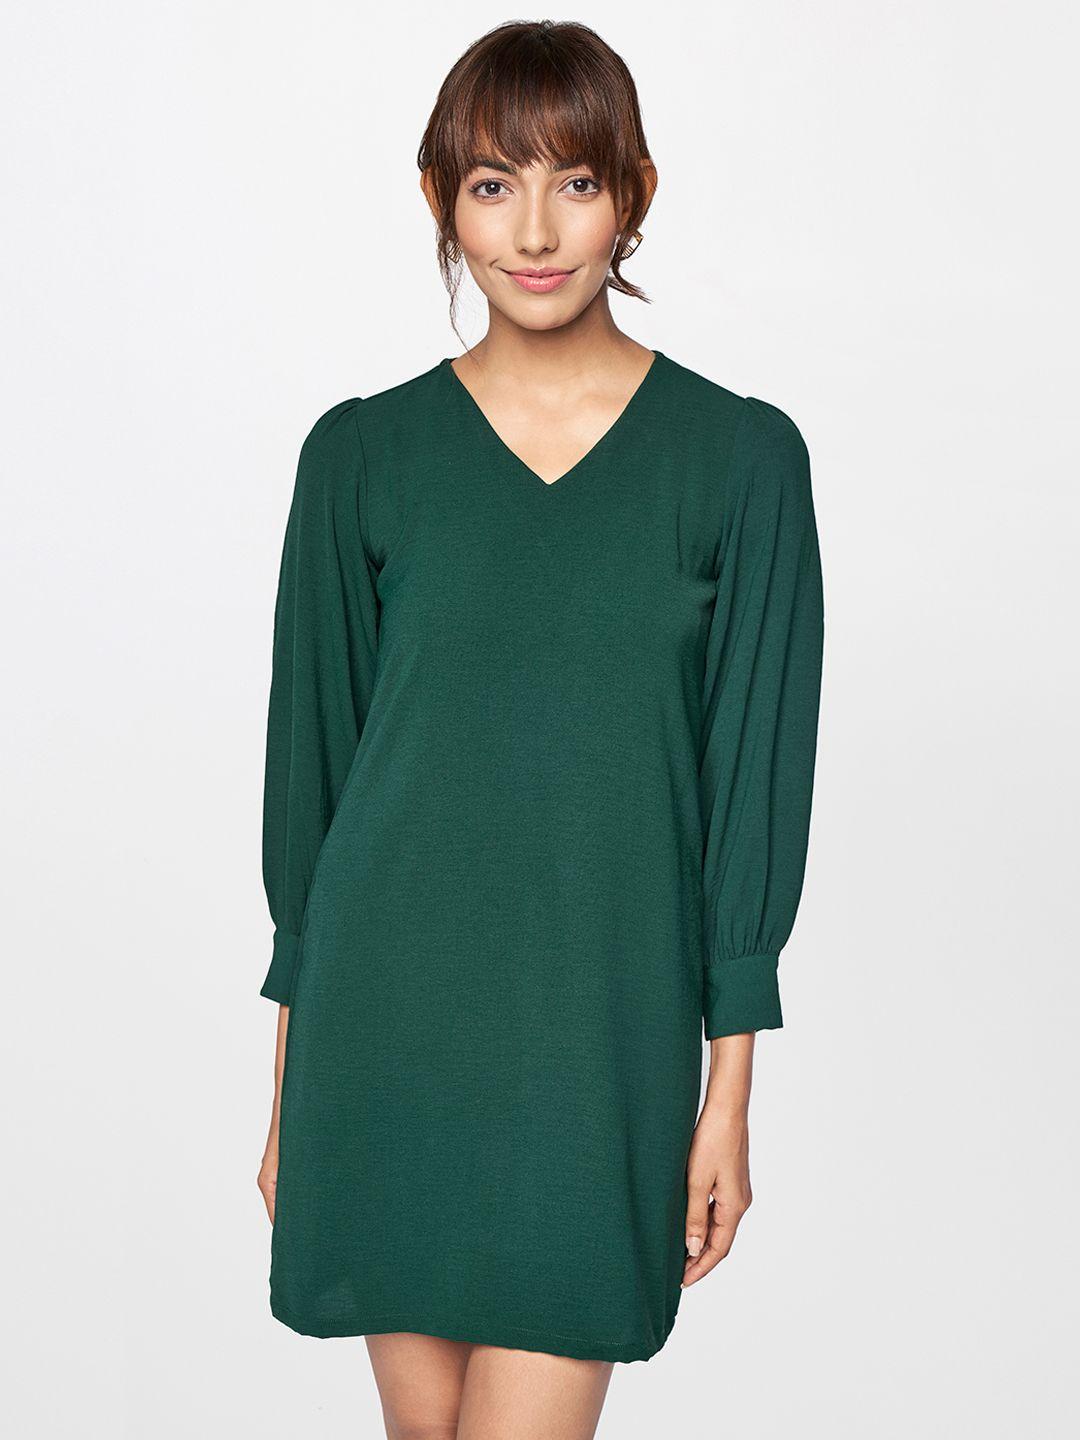 AND Women Dark Green Solid V-Neck Casual T-shirt Dress